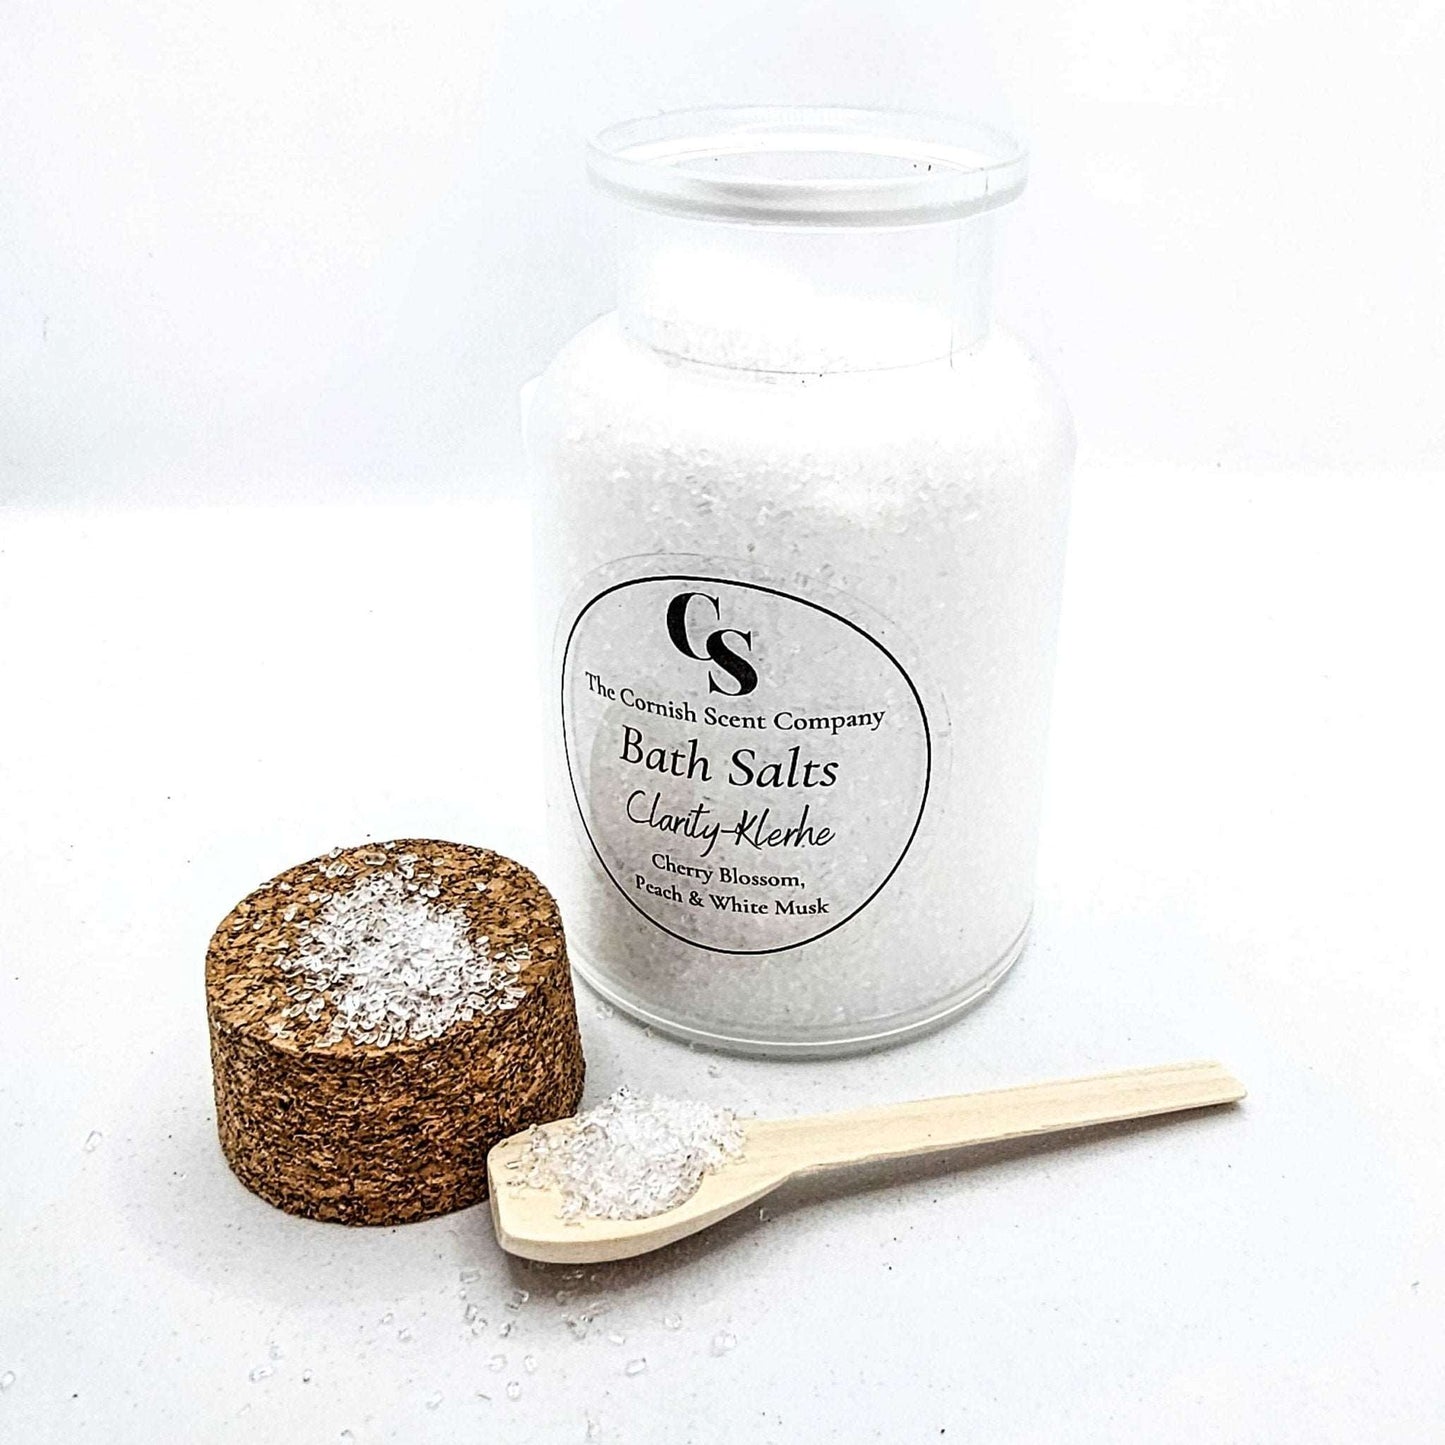 Soothing bath salts - The Cornish Scent Company